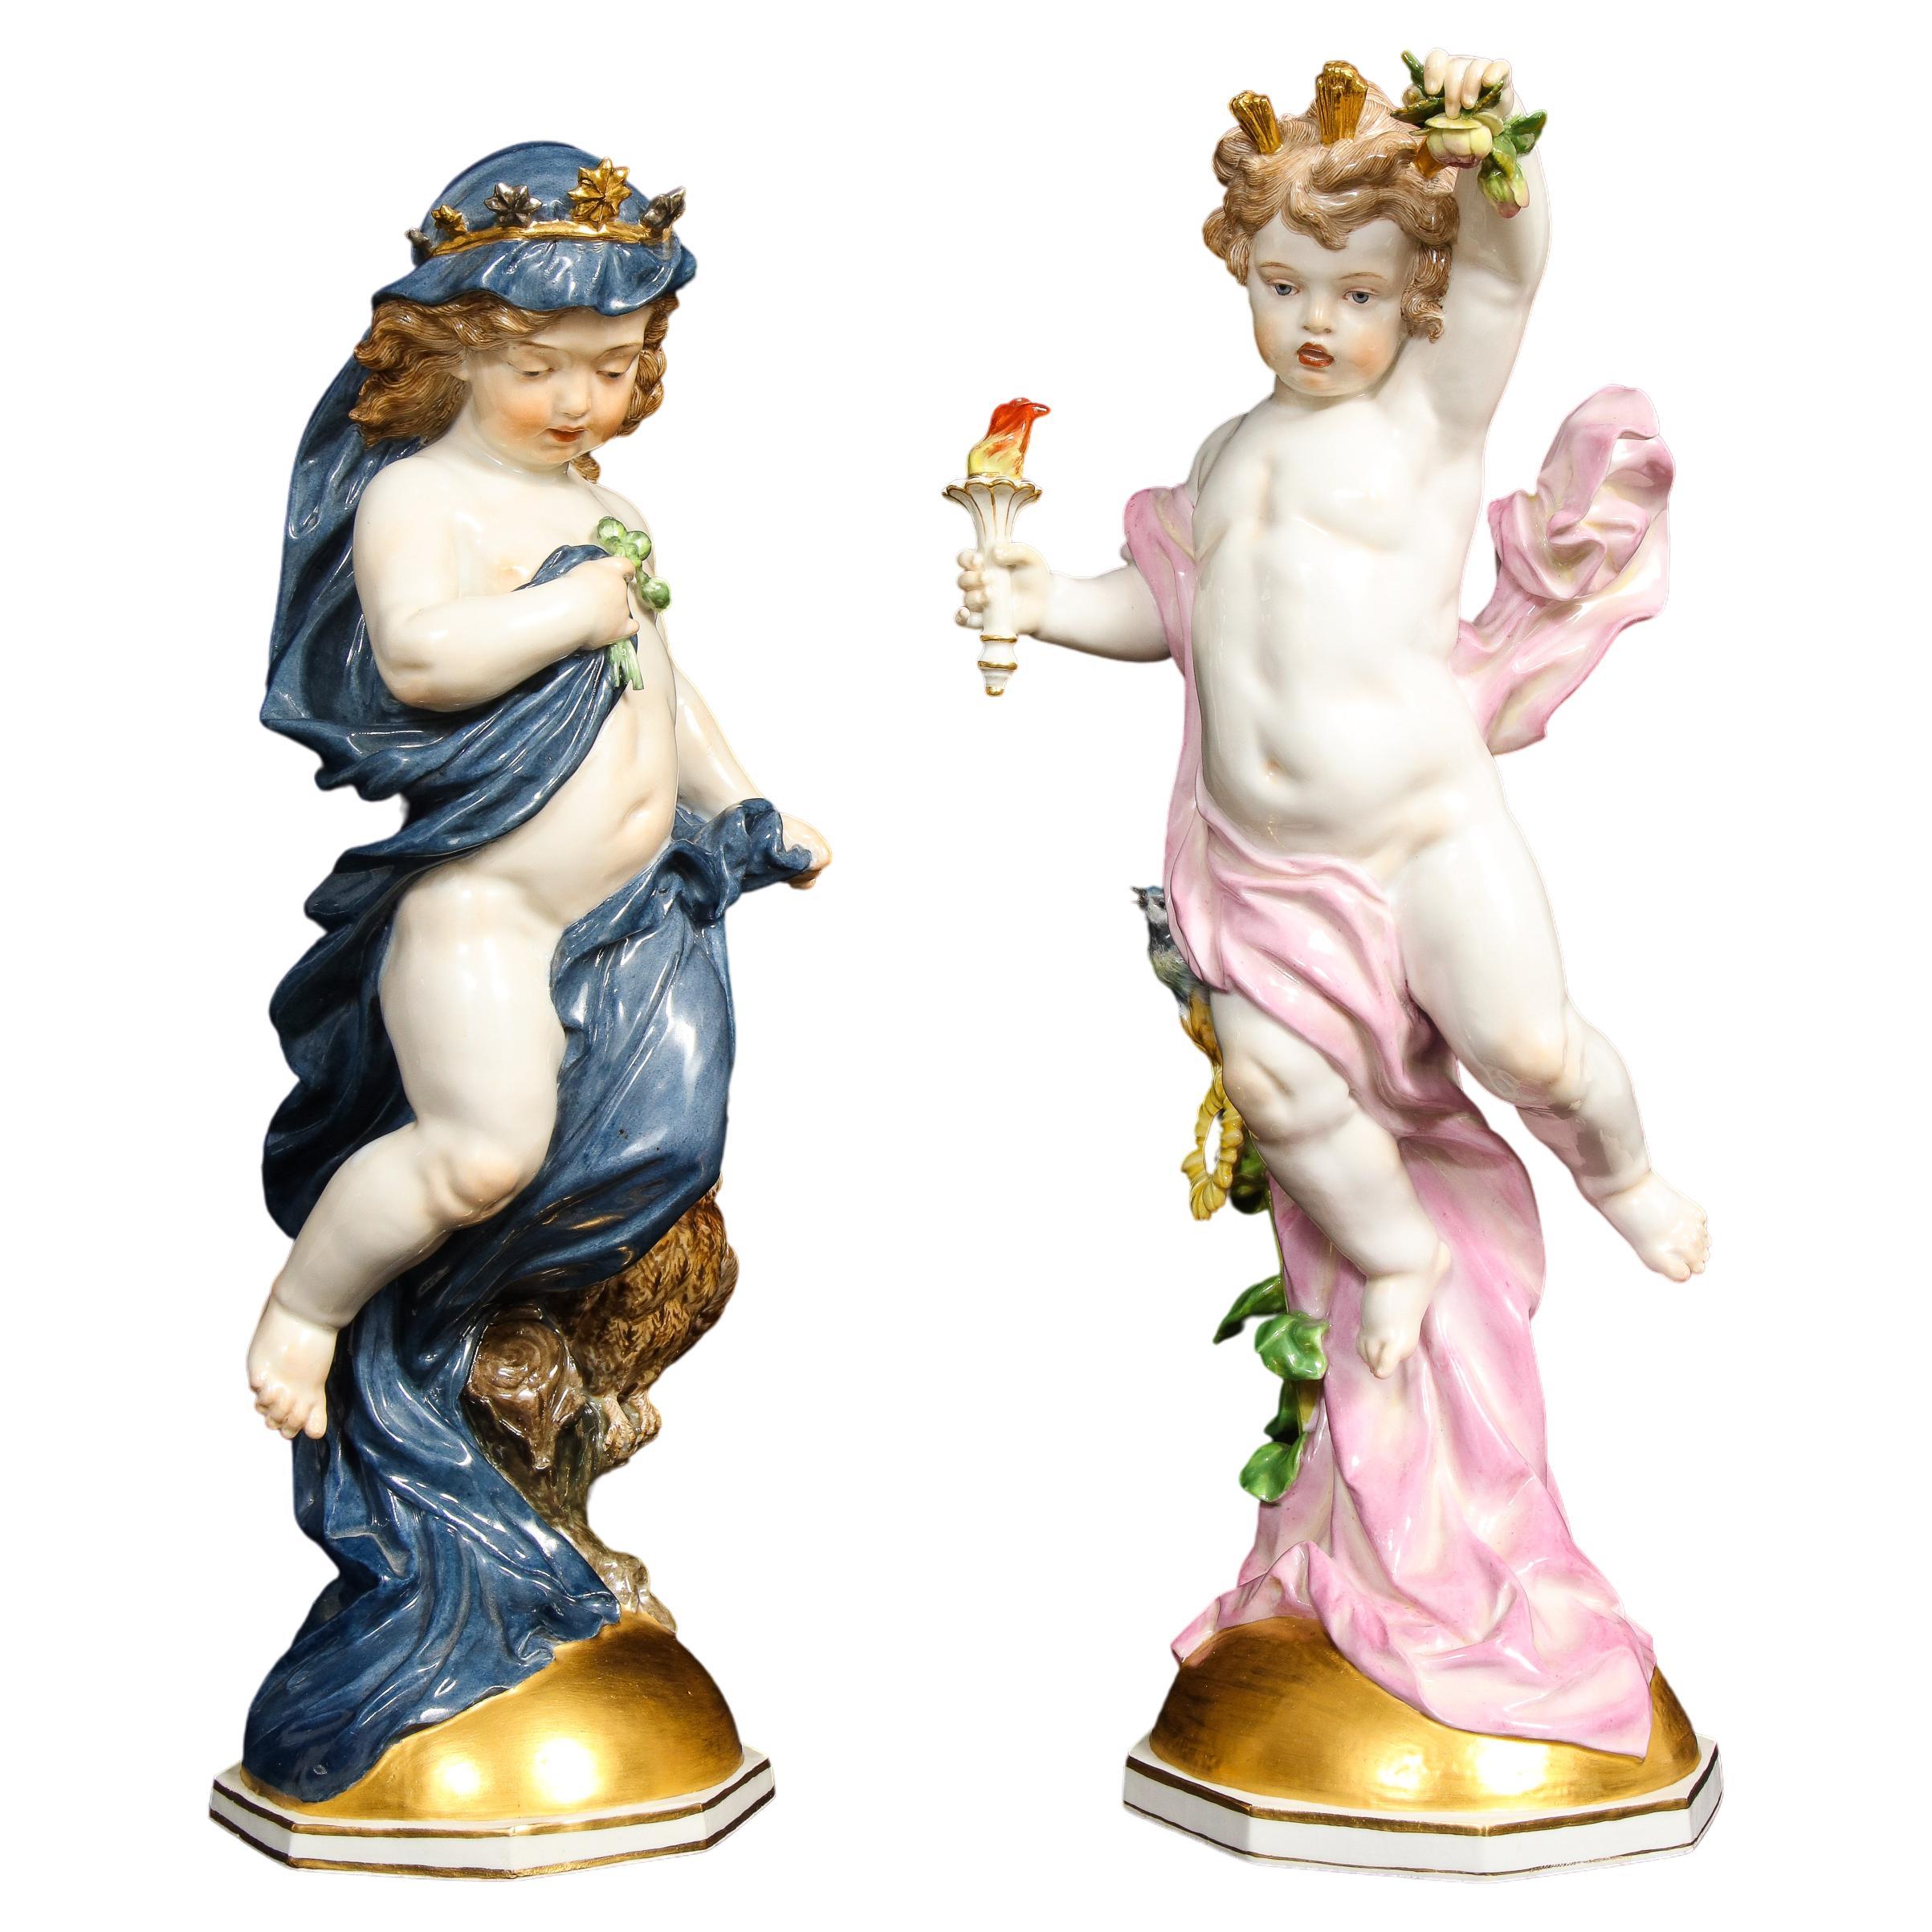 Large Pair of 19th Century Meissen Porcelain "Day & Night" Figures of Putti